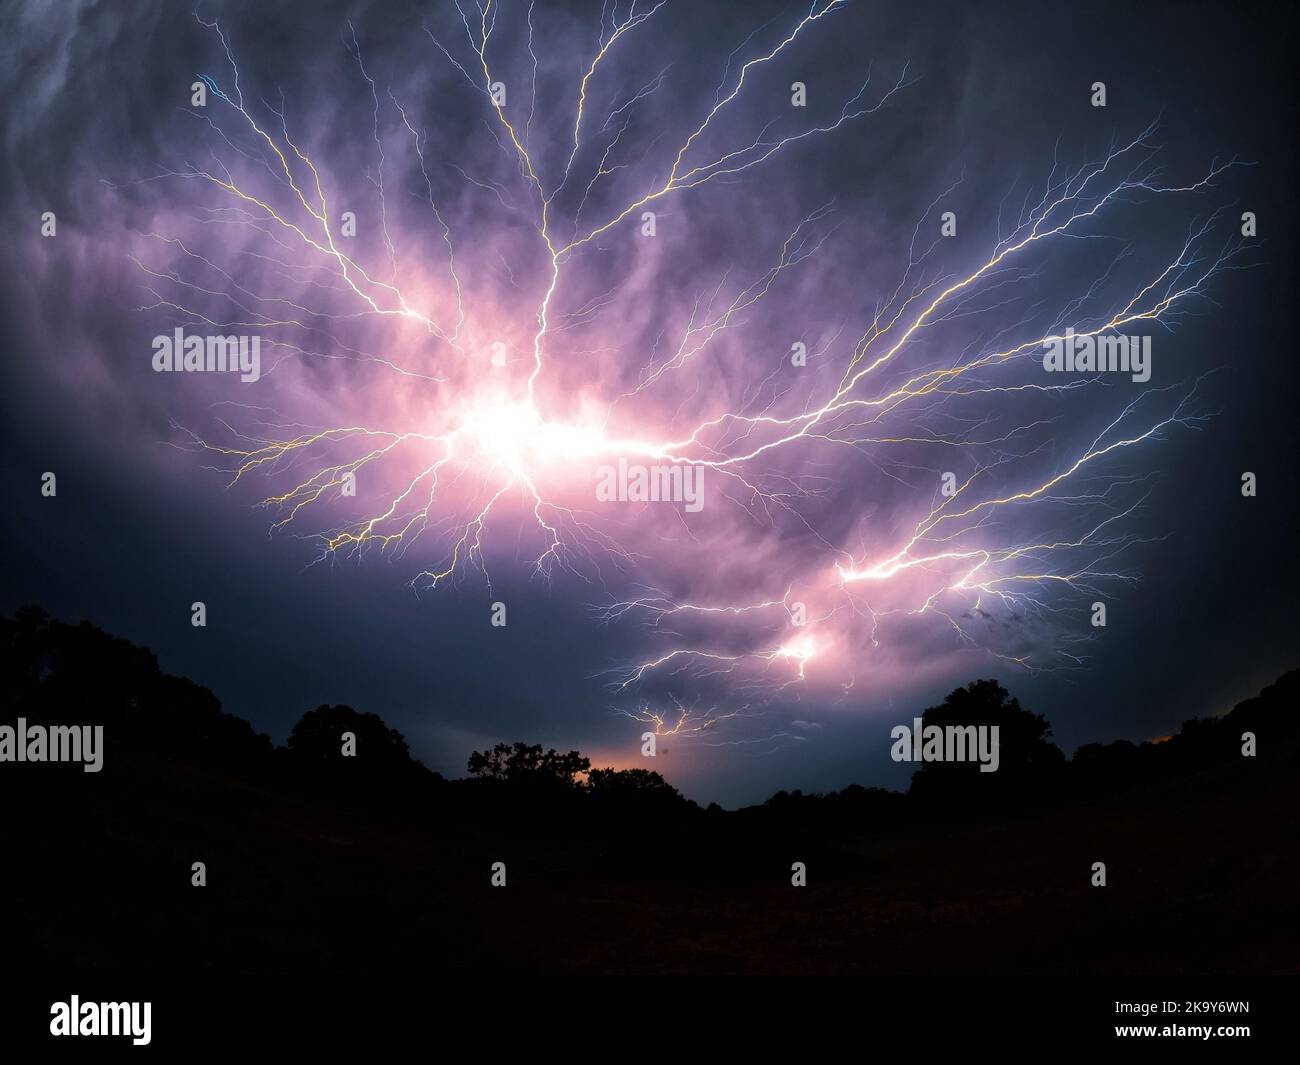 Multiple spider lightnings reaching across the sky in a thunderstorm at night, in a wide angle view Stock Photo